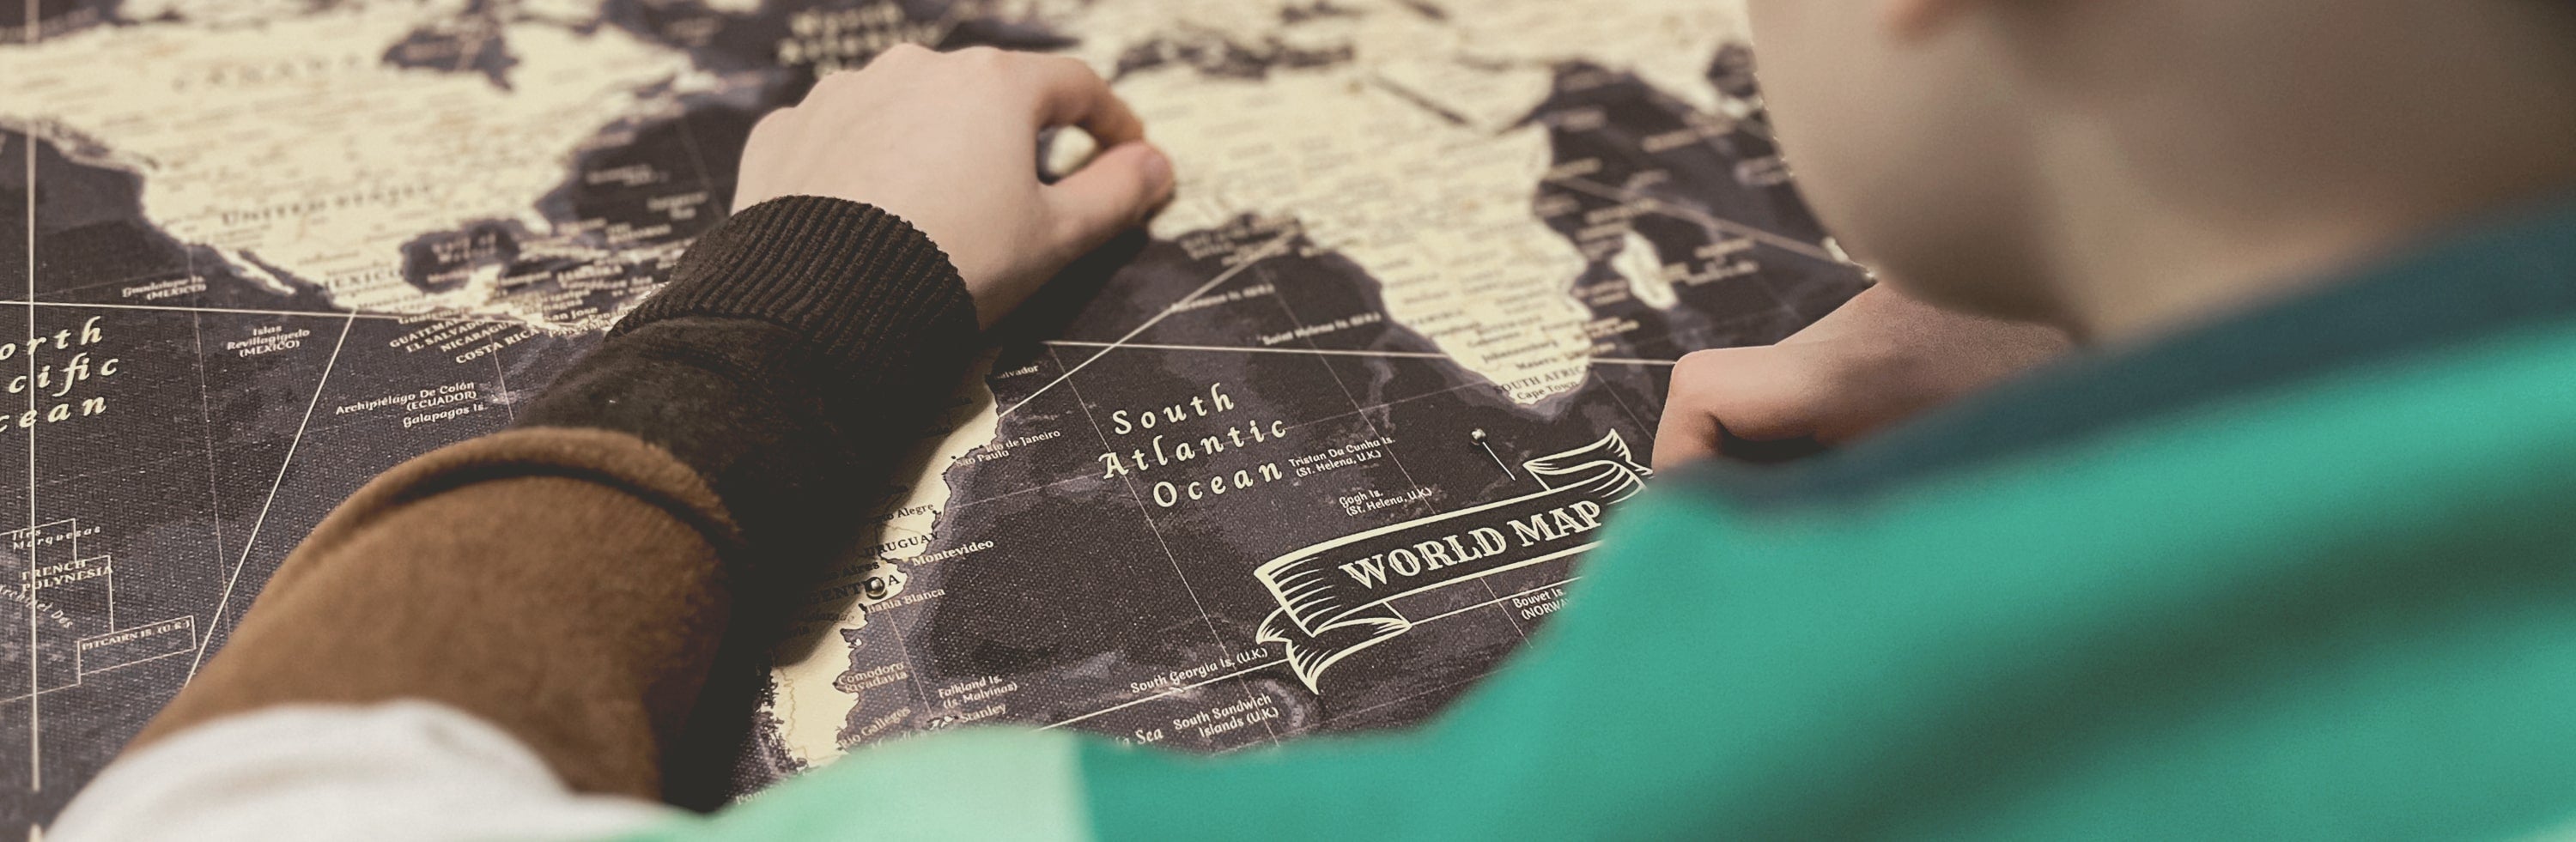 Close-up view of a young individual pinpointing a destination on a stylish world map canvas with push pins, perfect for wall art and tracking travel adventures – available as a world map pin board from www.pinmap.eu for avid explorers and travel enthusiasts.